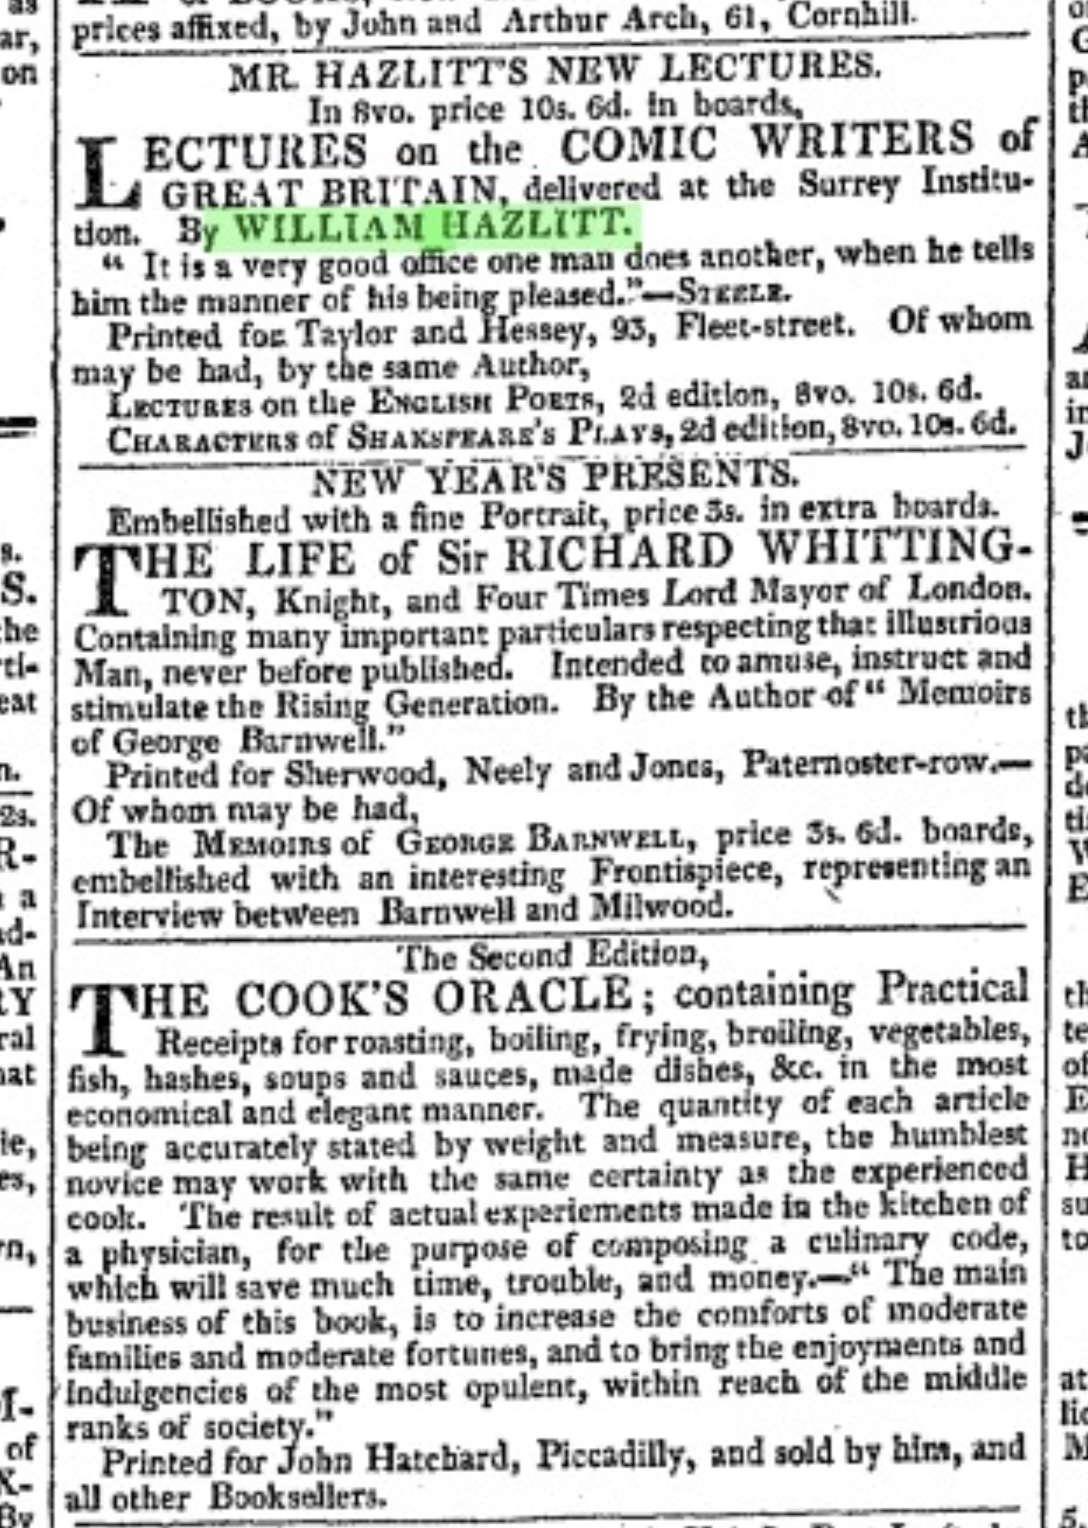  Hazlitt’s lectures advertised in The Morning
          Chronicle, 11 April 1819